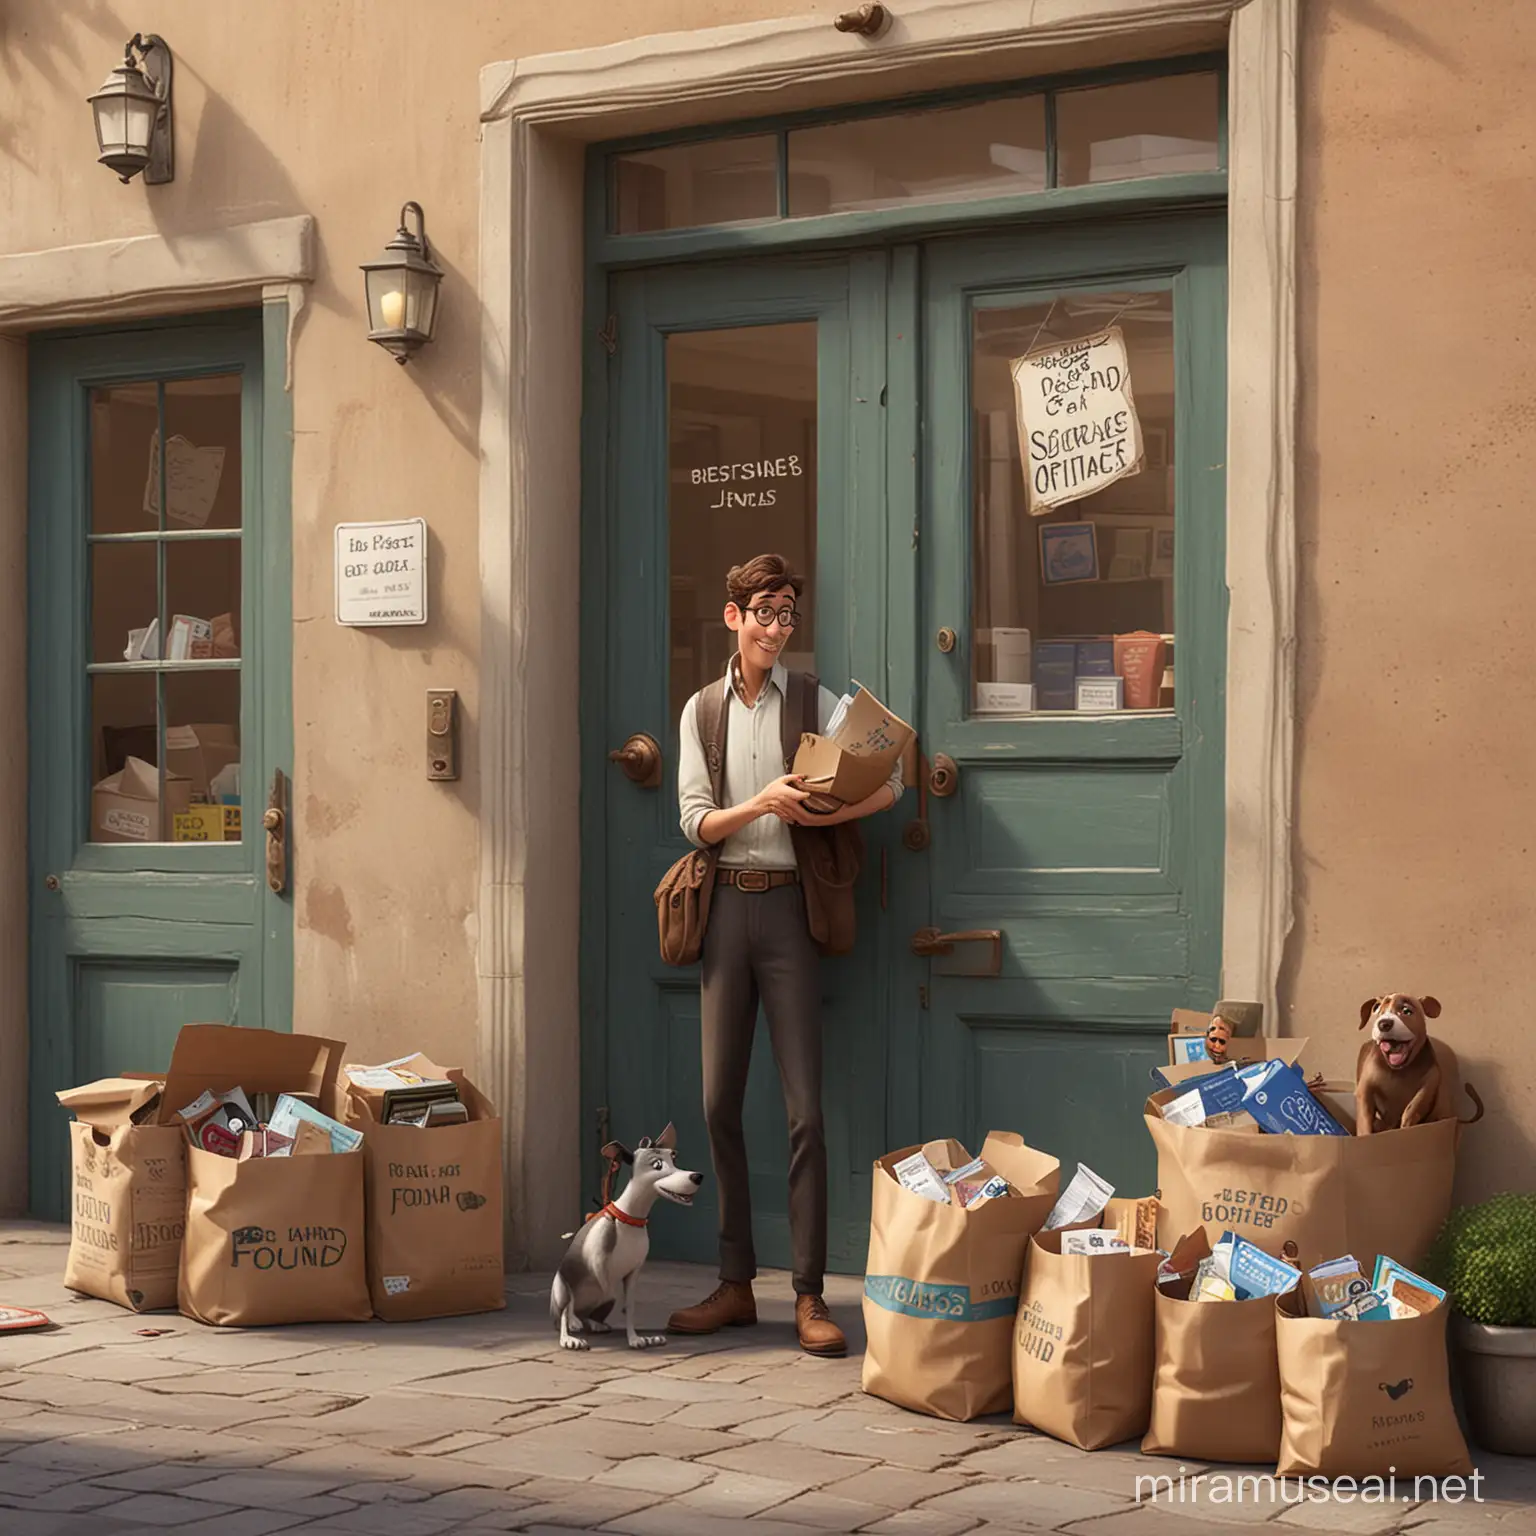 Man Collecting Lost Animals at PixarStyle Lost and Found Office